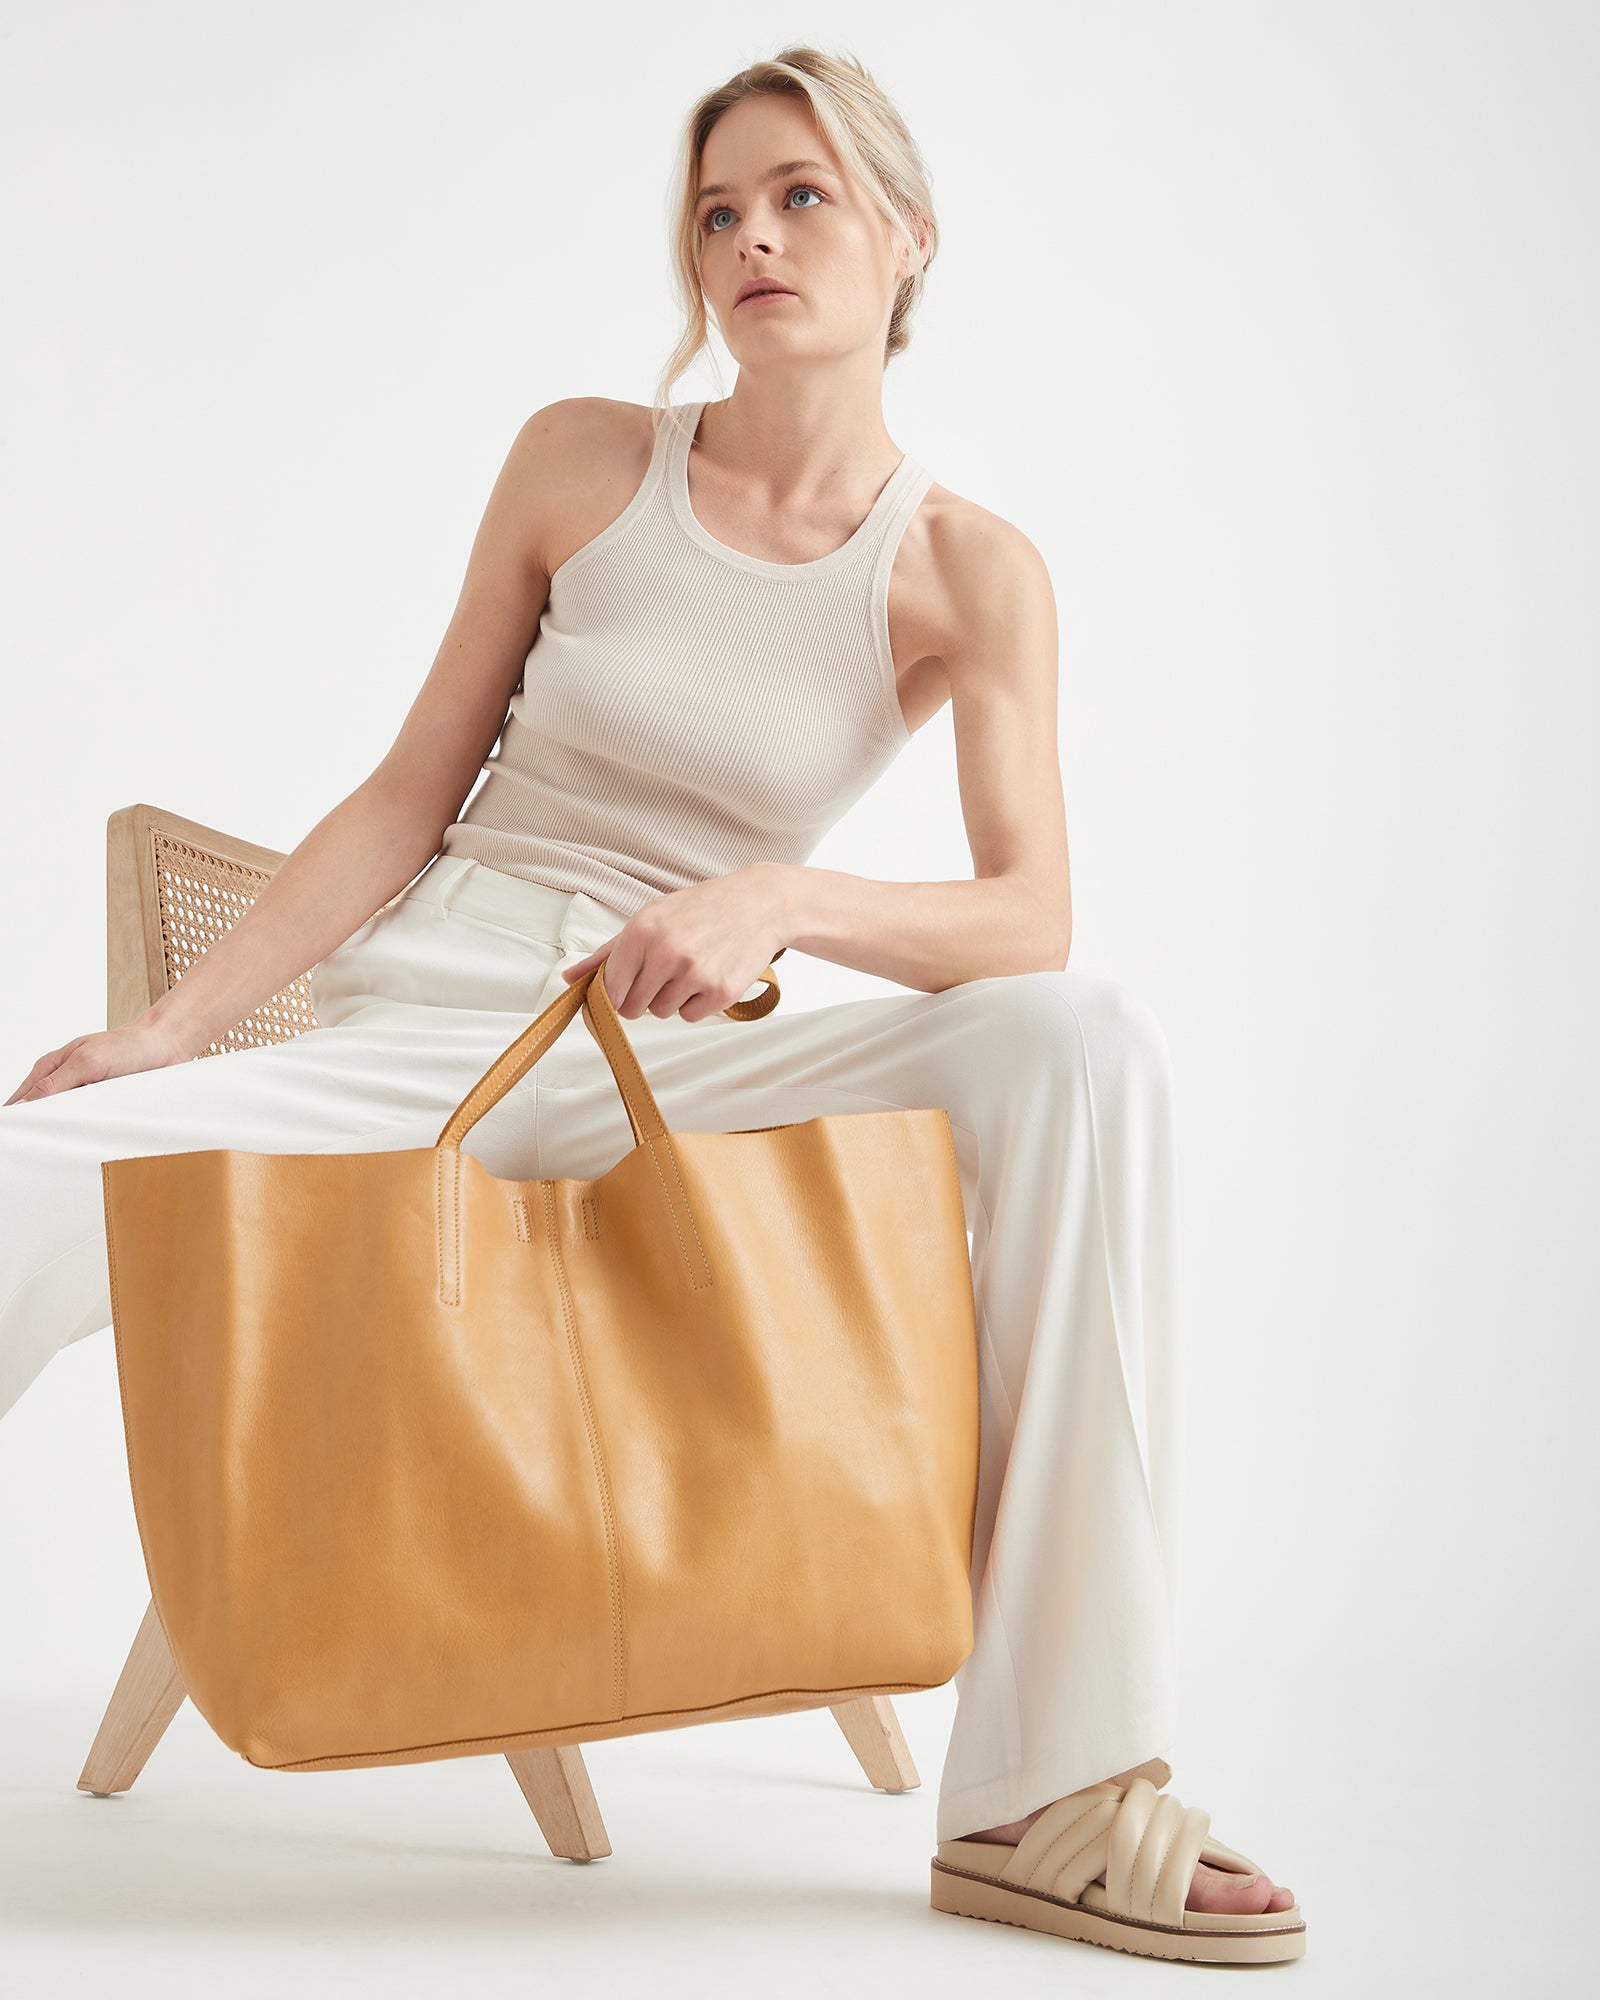 Unlined Tote Tan